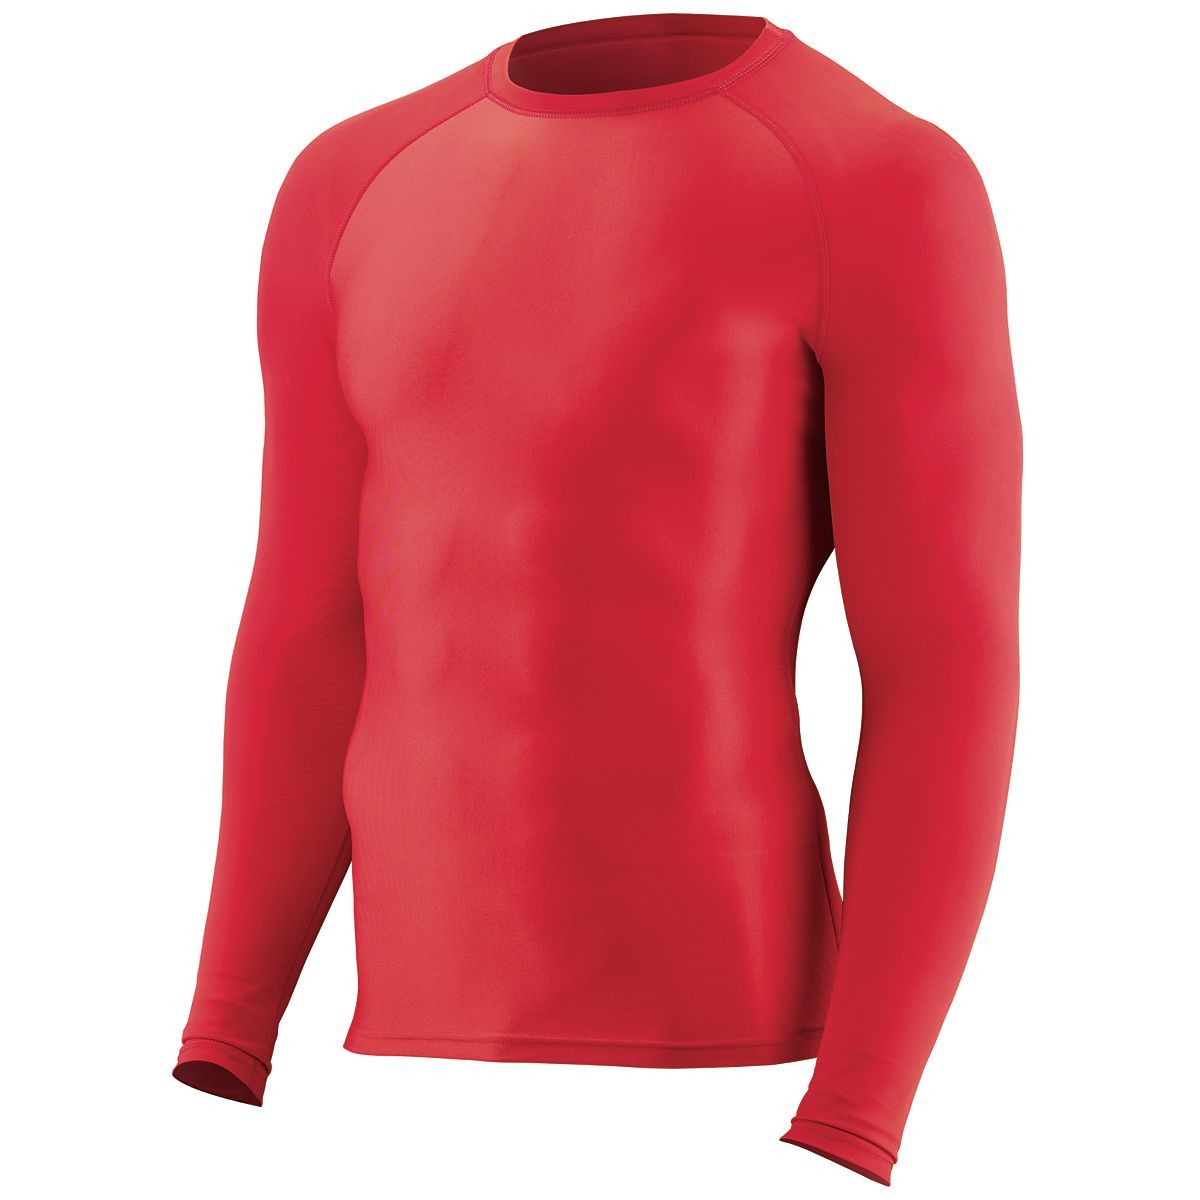 Youth Hyperform Compression Long Sleeve Tee - 2605